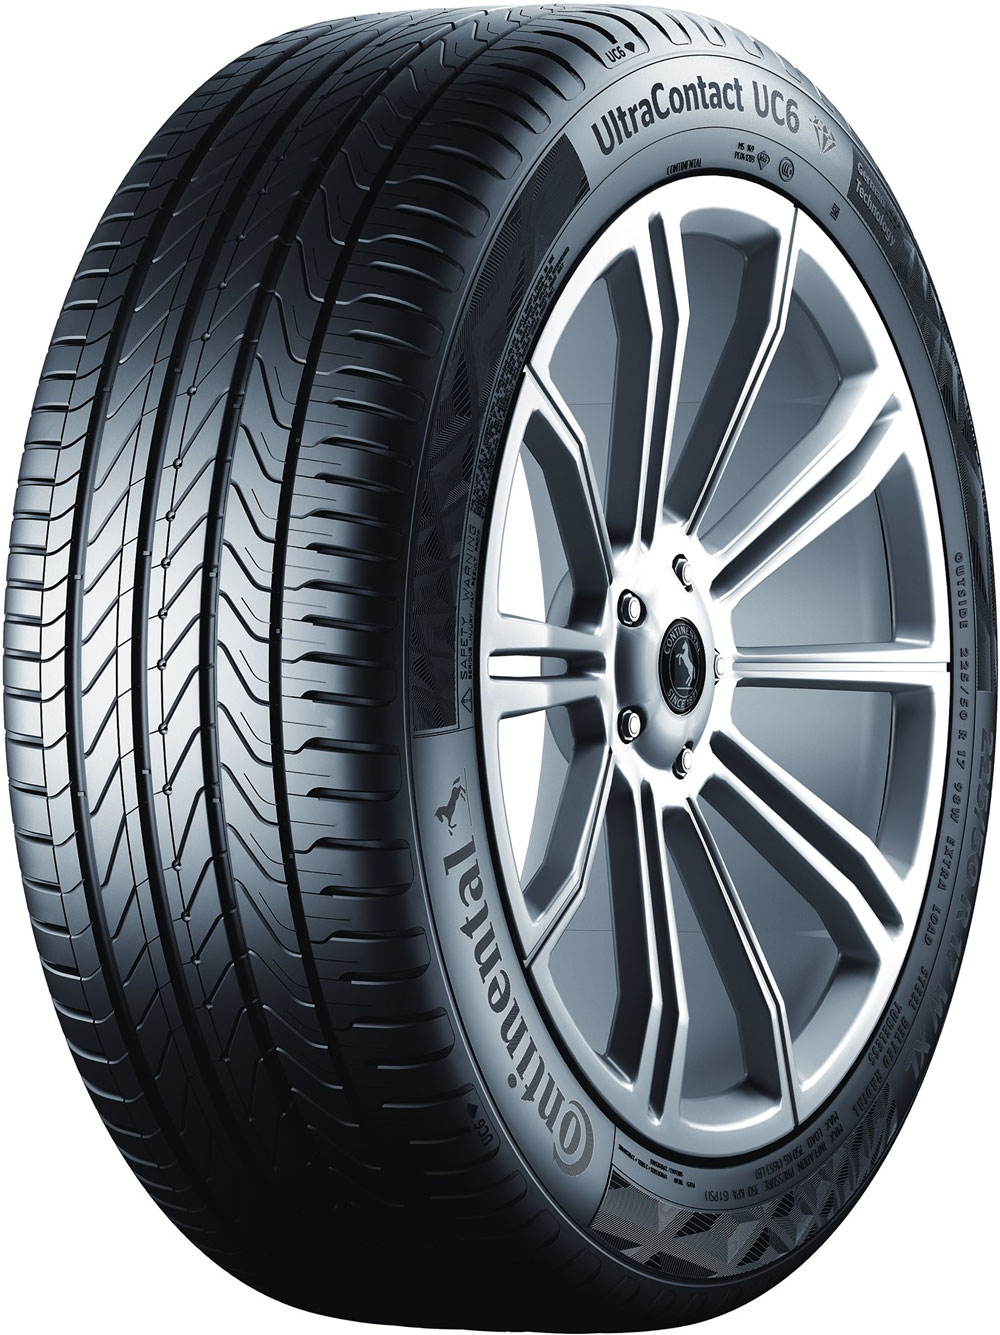 Anvelope auto CONTINENTAL UCXLFR XL 235/50 R18 101V